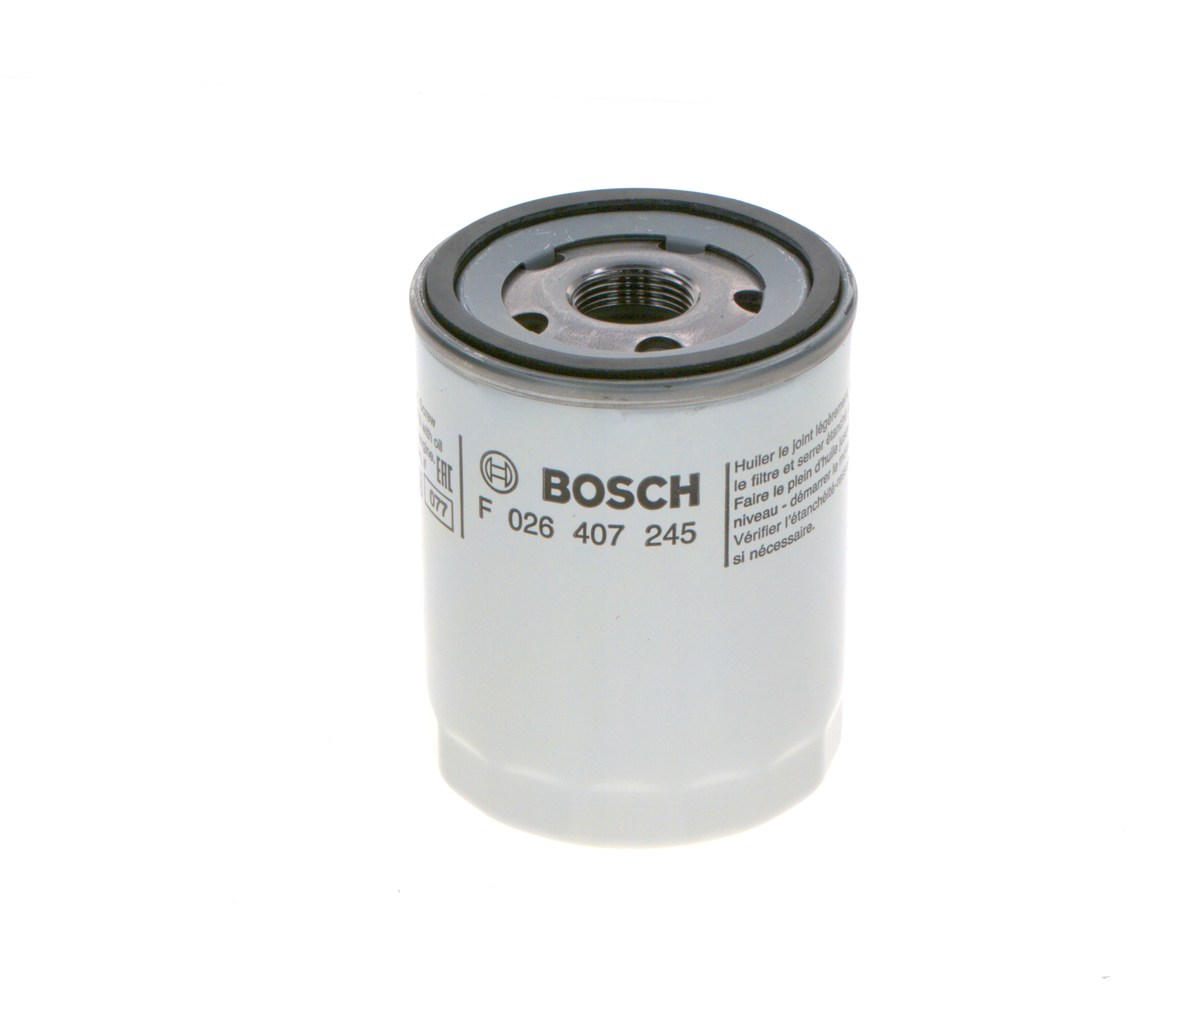 P 7245 BOSCH M 22 x 1,5, with two anti-return valves, Spin-on Filter Inner Diameter 2: 63mm, Outer Diameter 2: 72mm, Ø: 76mm, Height: 100mm Oil filters F 026 407 245 buy